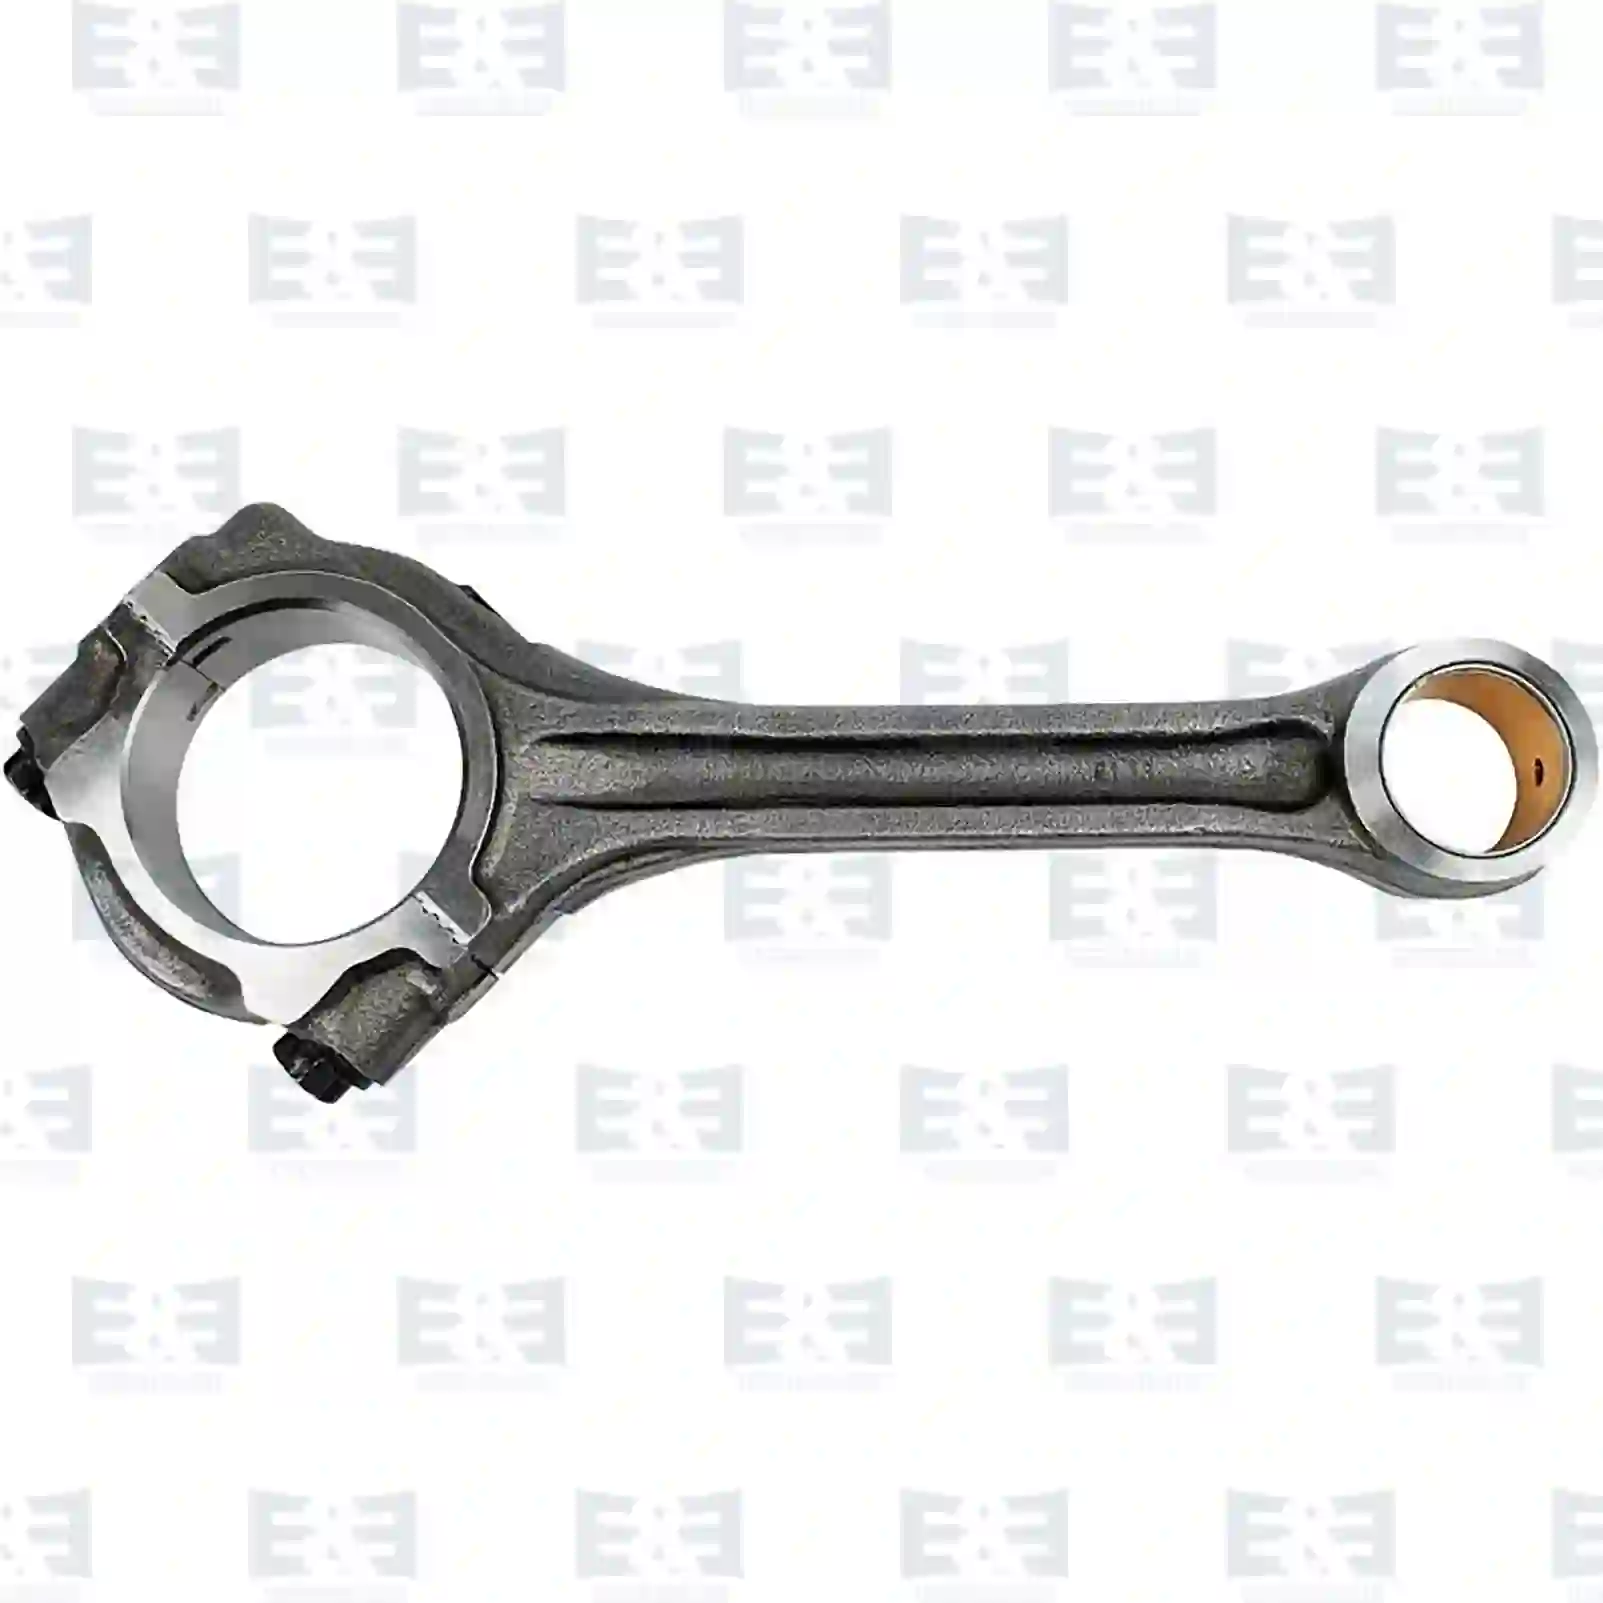 Connecting Rod              Connecting rod, straight head, EE No 2E2209249 ,  oem no:3520301220, 3520301420, 3520302720, 3520303420, 3520303920, 3520304220, 3520304920, 3520305720, 3660302120, 3660302520, 3660303520, 366030352080, 3660305520, 3660307120, 3760307120, 3760307220, ZG00992-0008 E&E Truck Spare Parts | Truck Spare Parts, Auotomotive Spare Parts